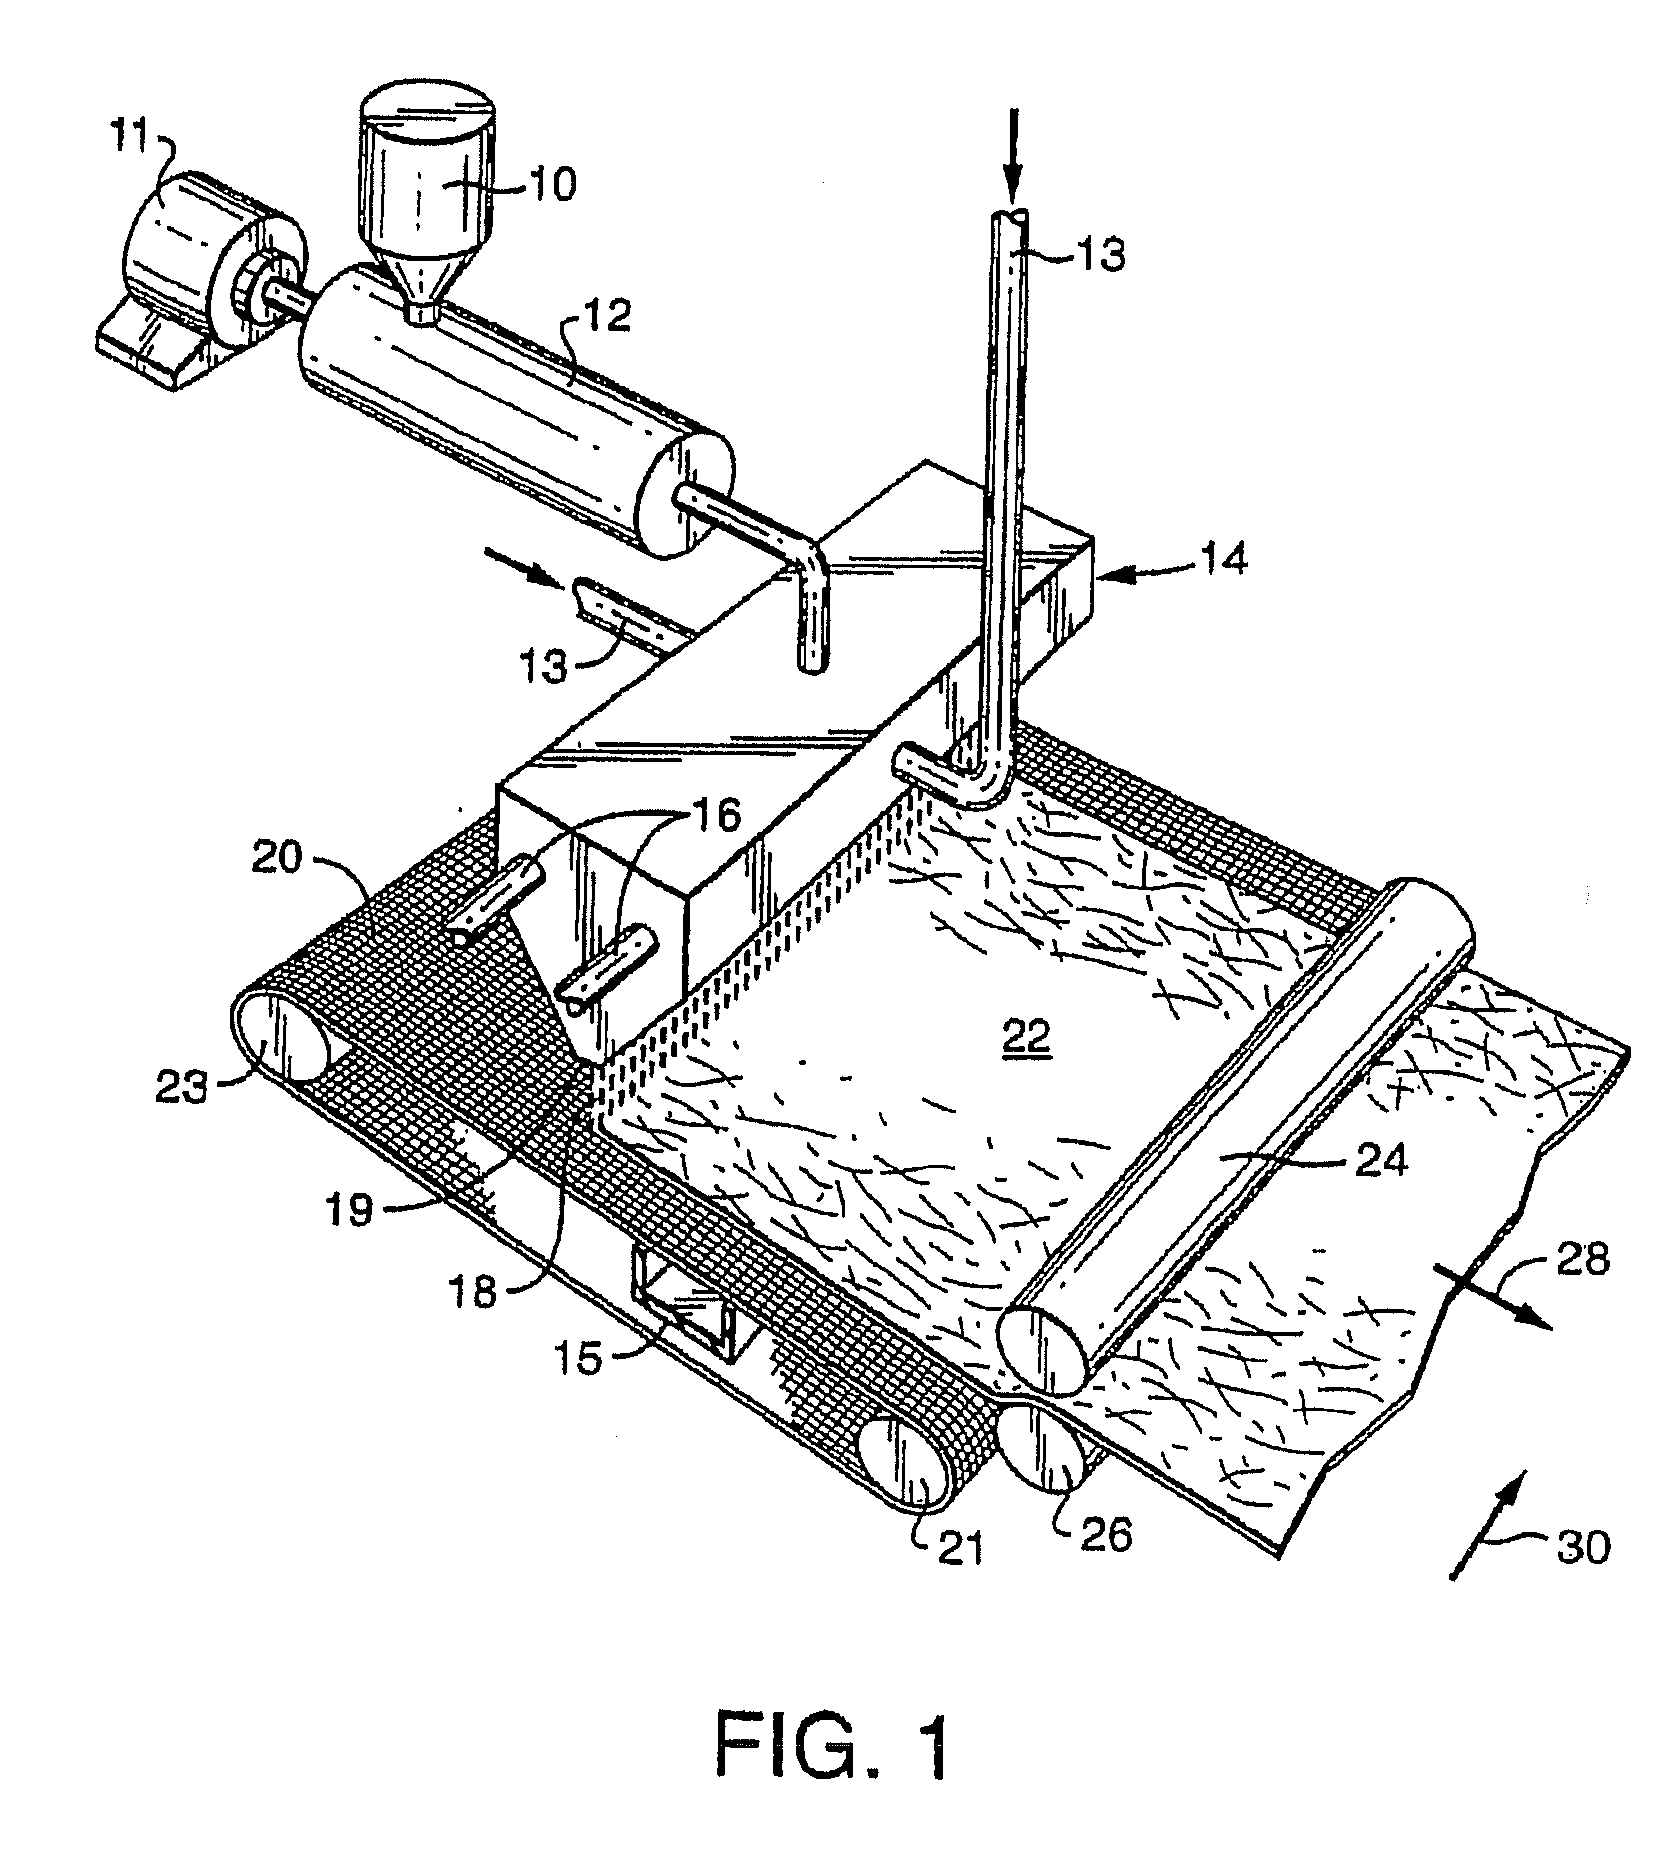 Biodegradable polylactic acid for use in nonwoven webs